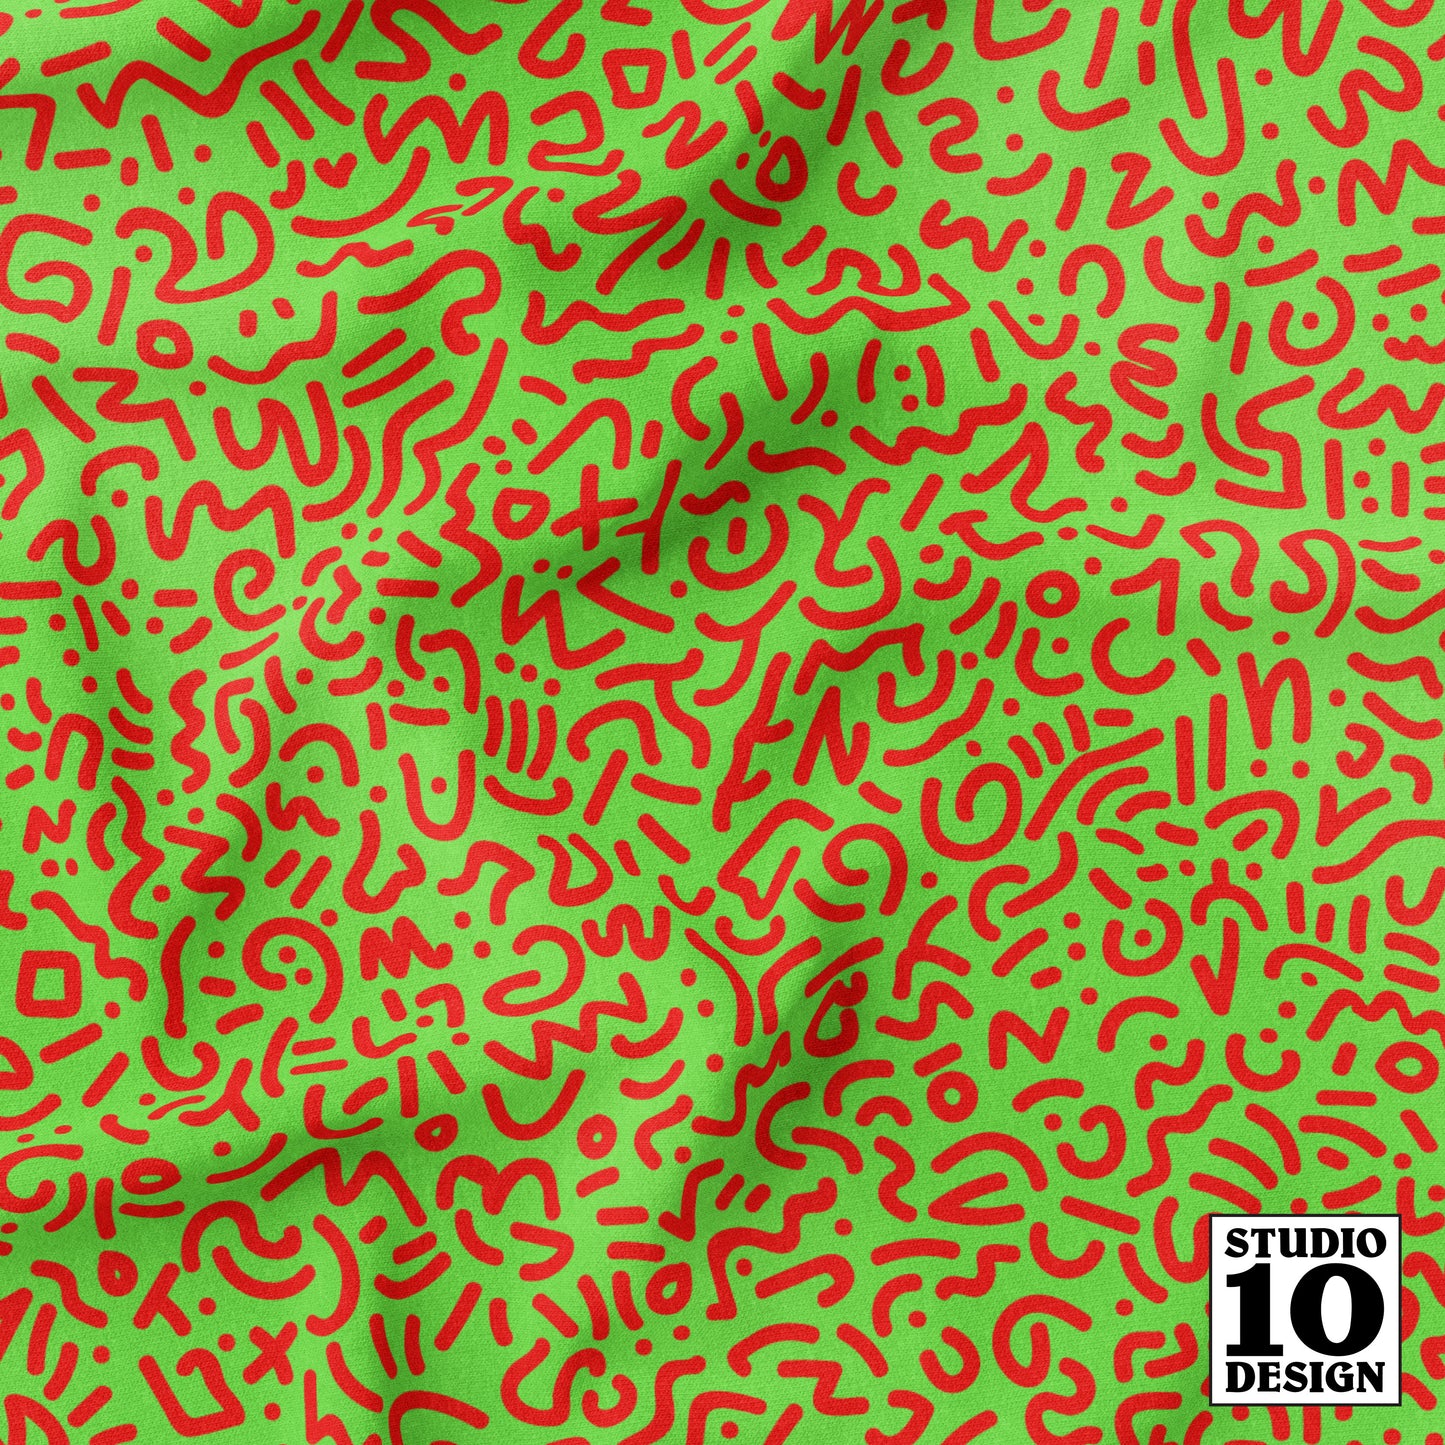 Doodle Red+Green Printed Fabric by Studio Ten Design